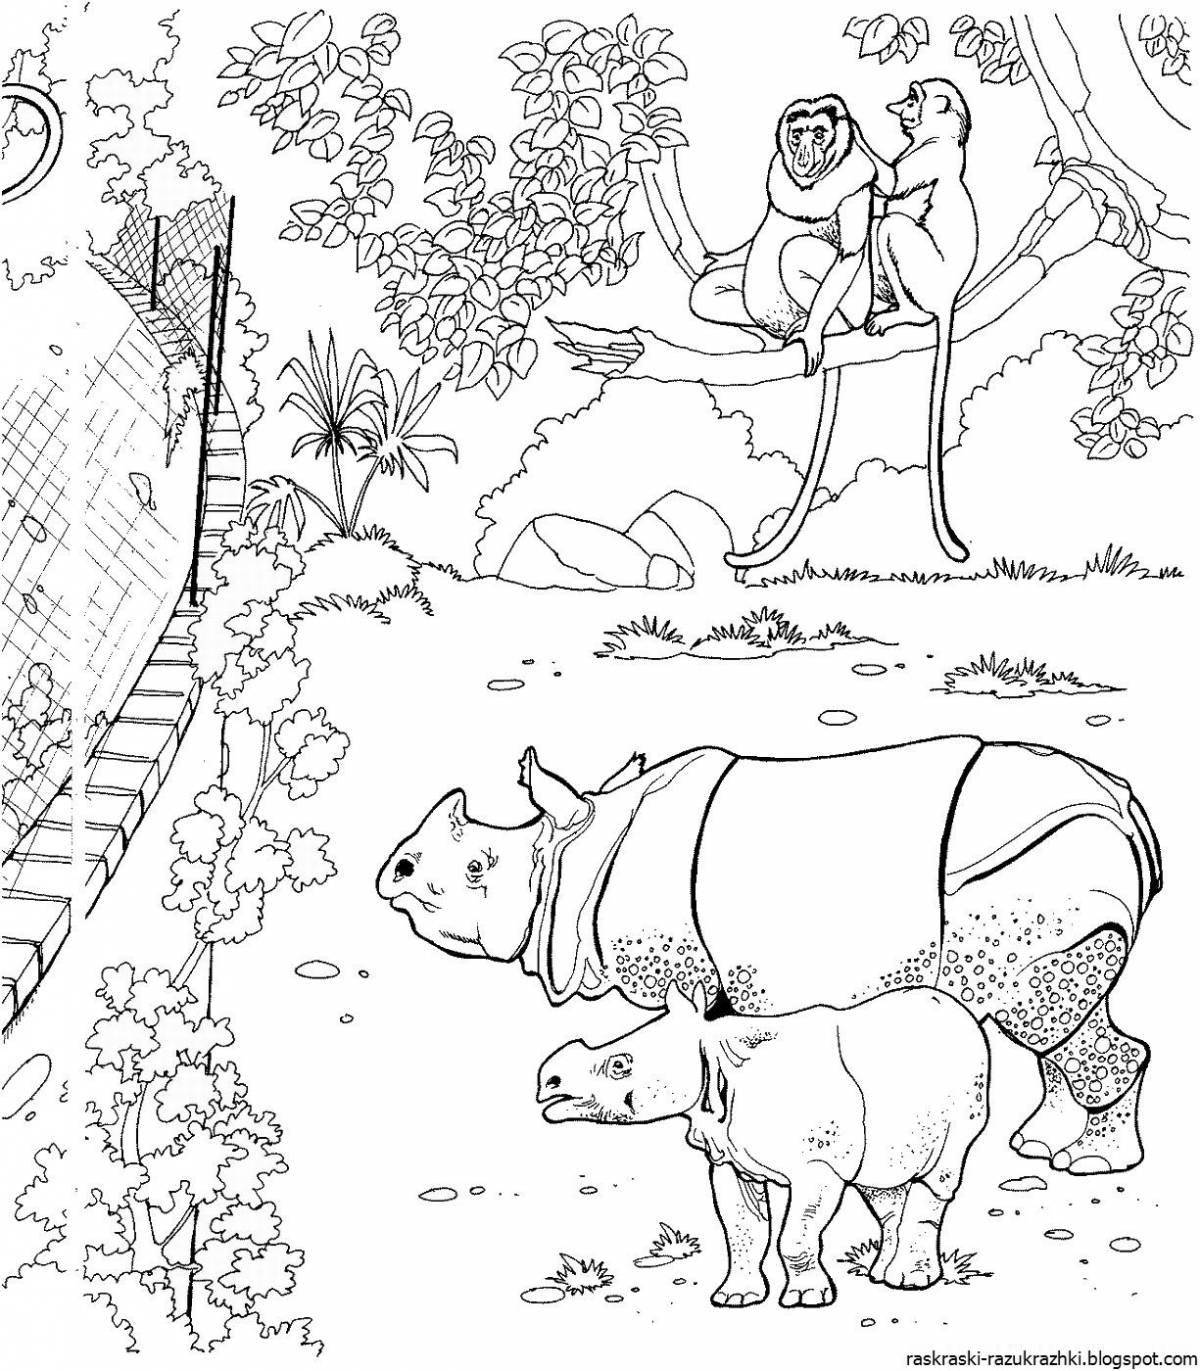 Zoo animals playful coloring page